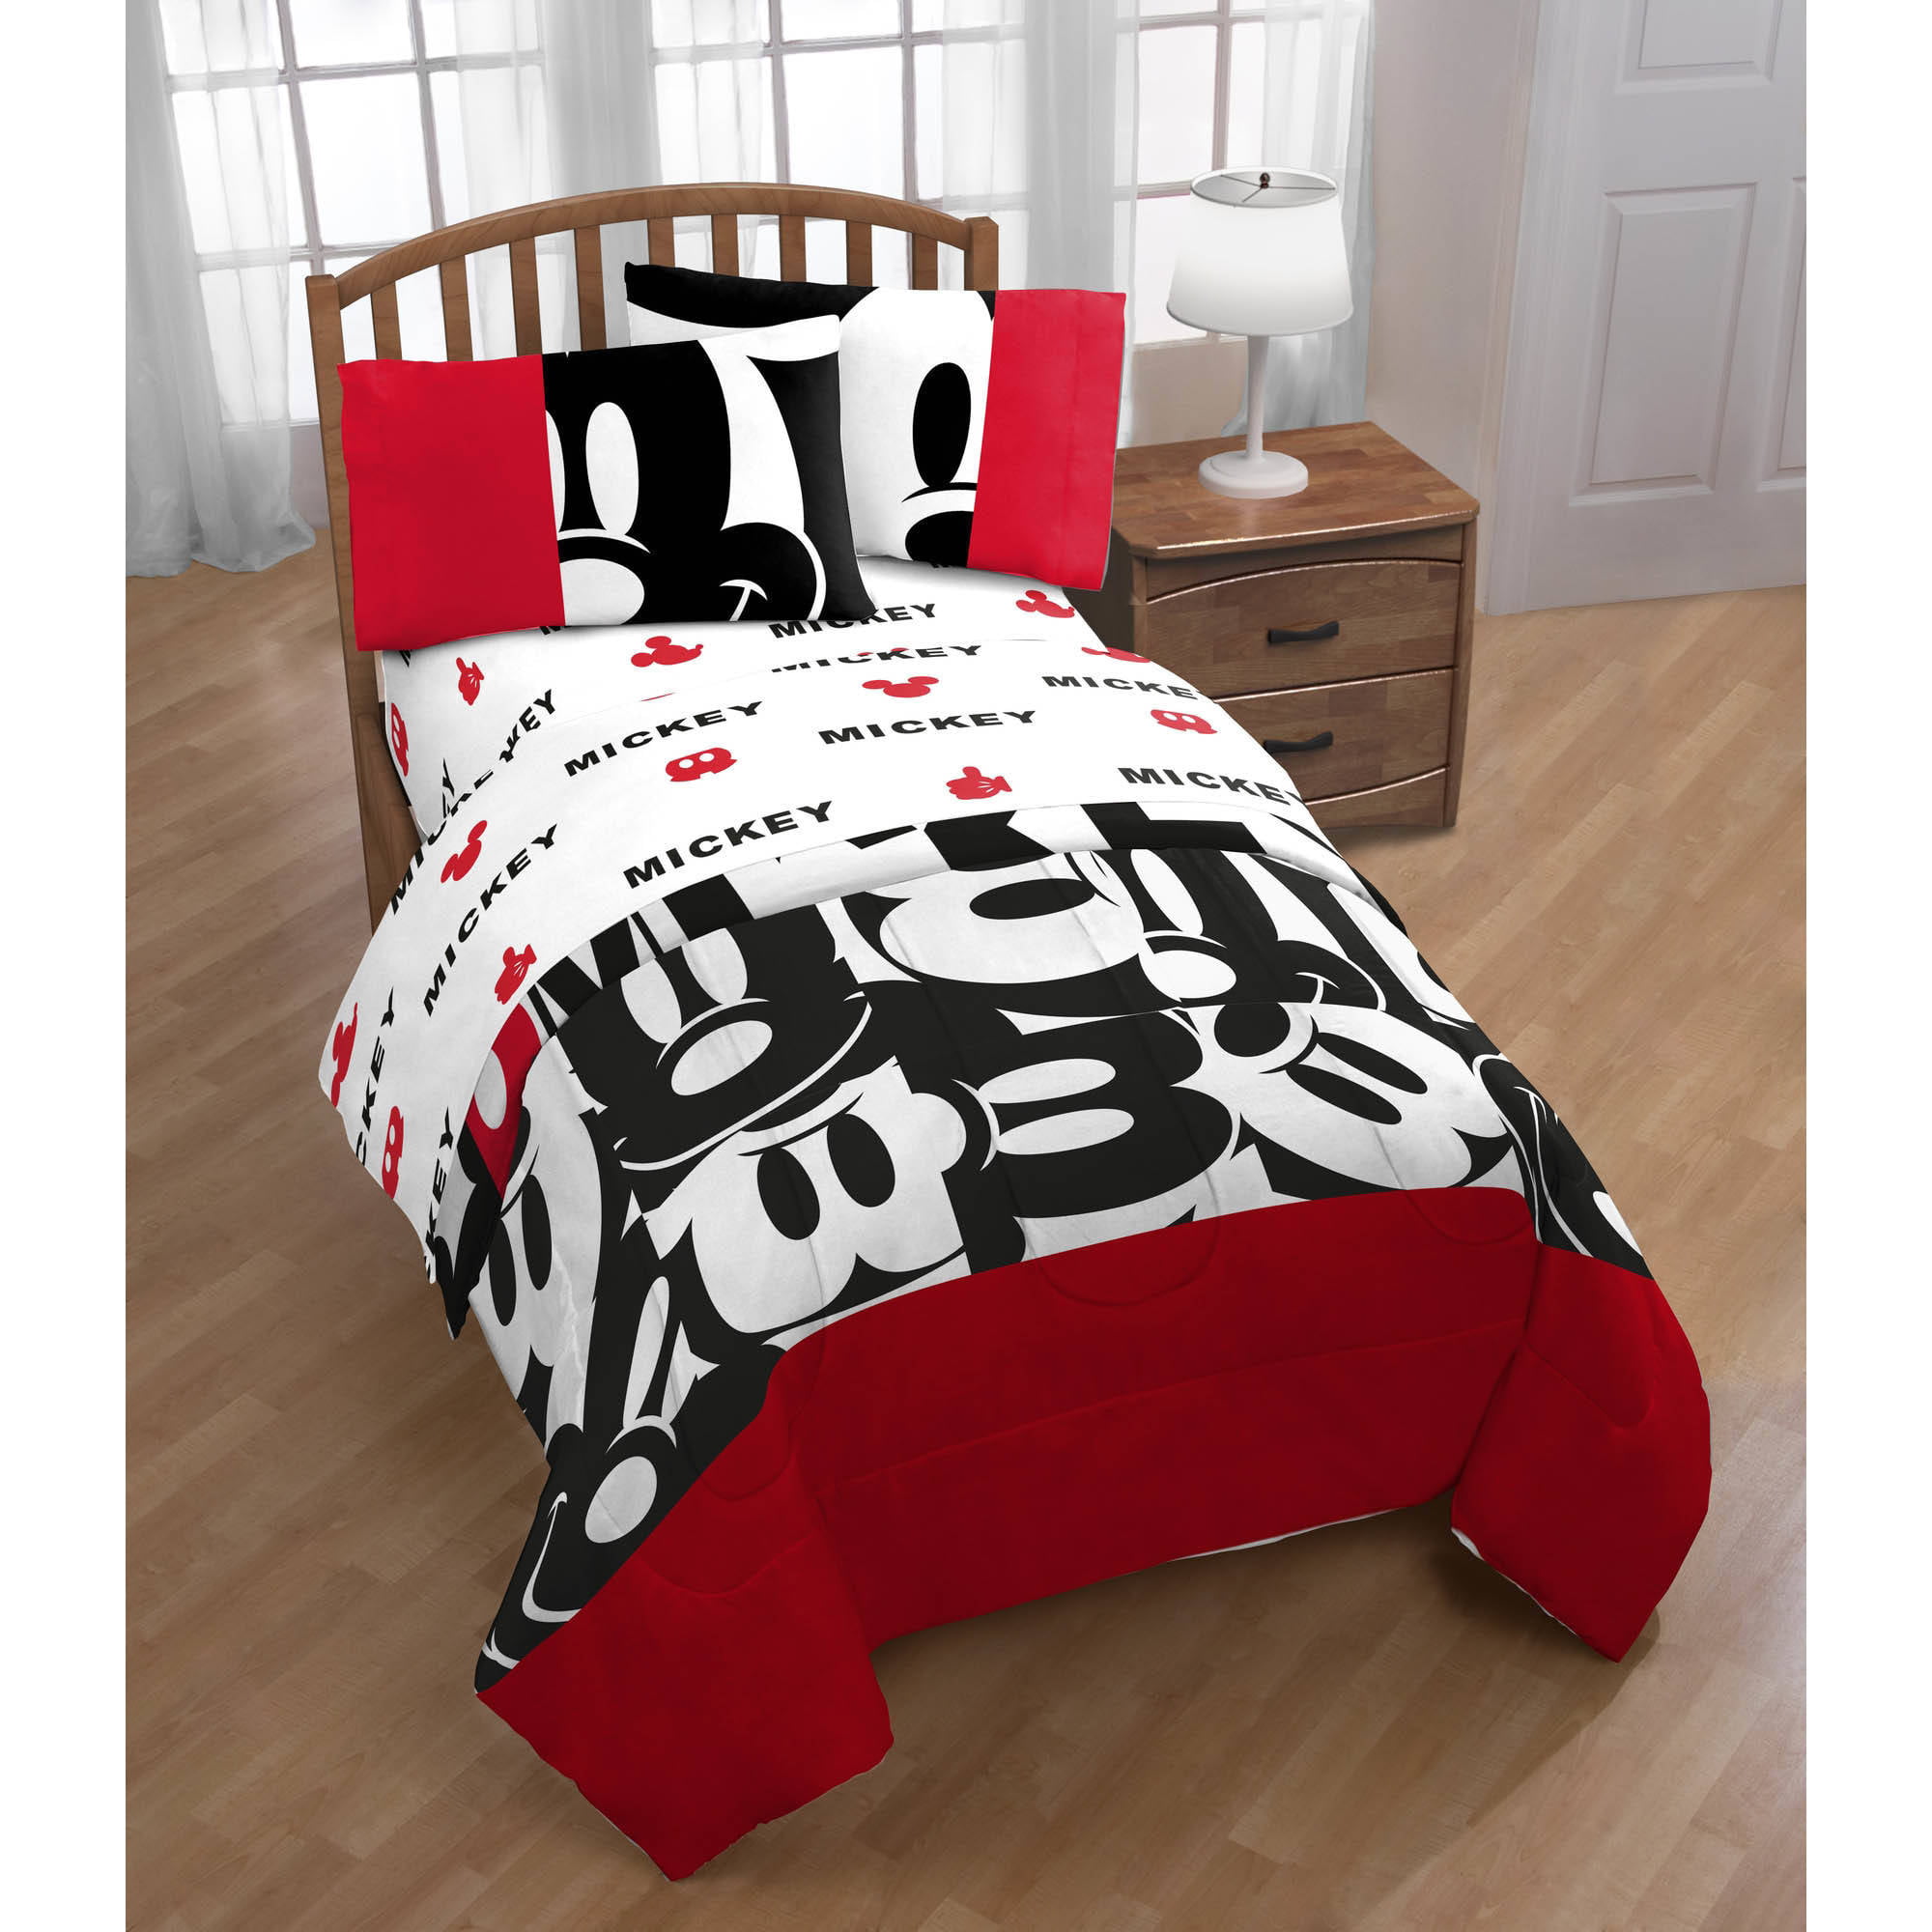 Mickey Mouse Red Black Comforter, Red Queen Size Mickey Mouse Bedding